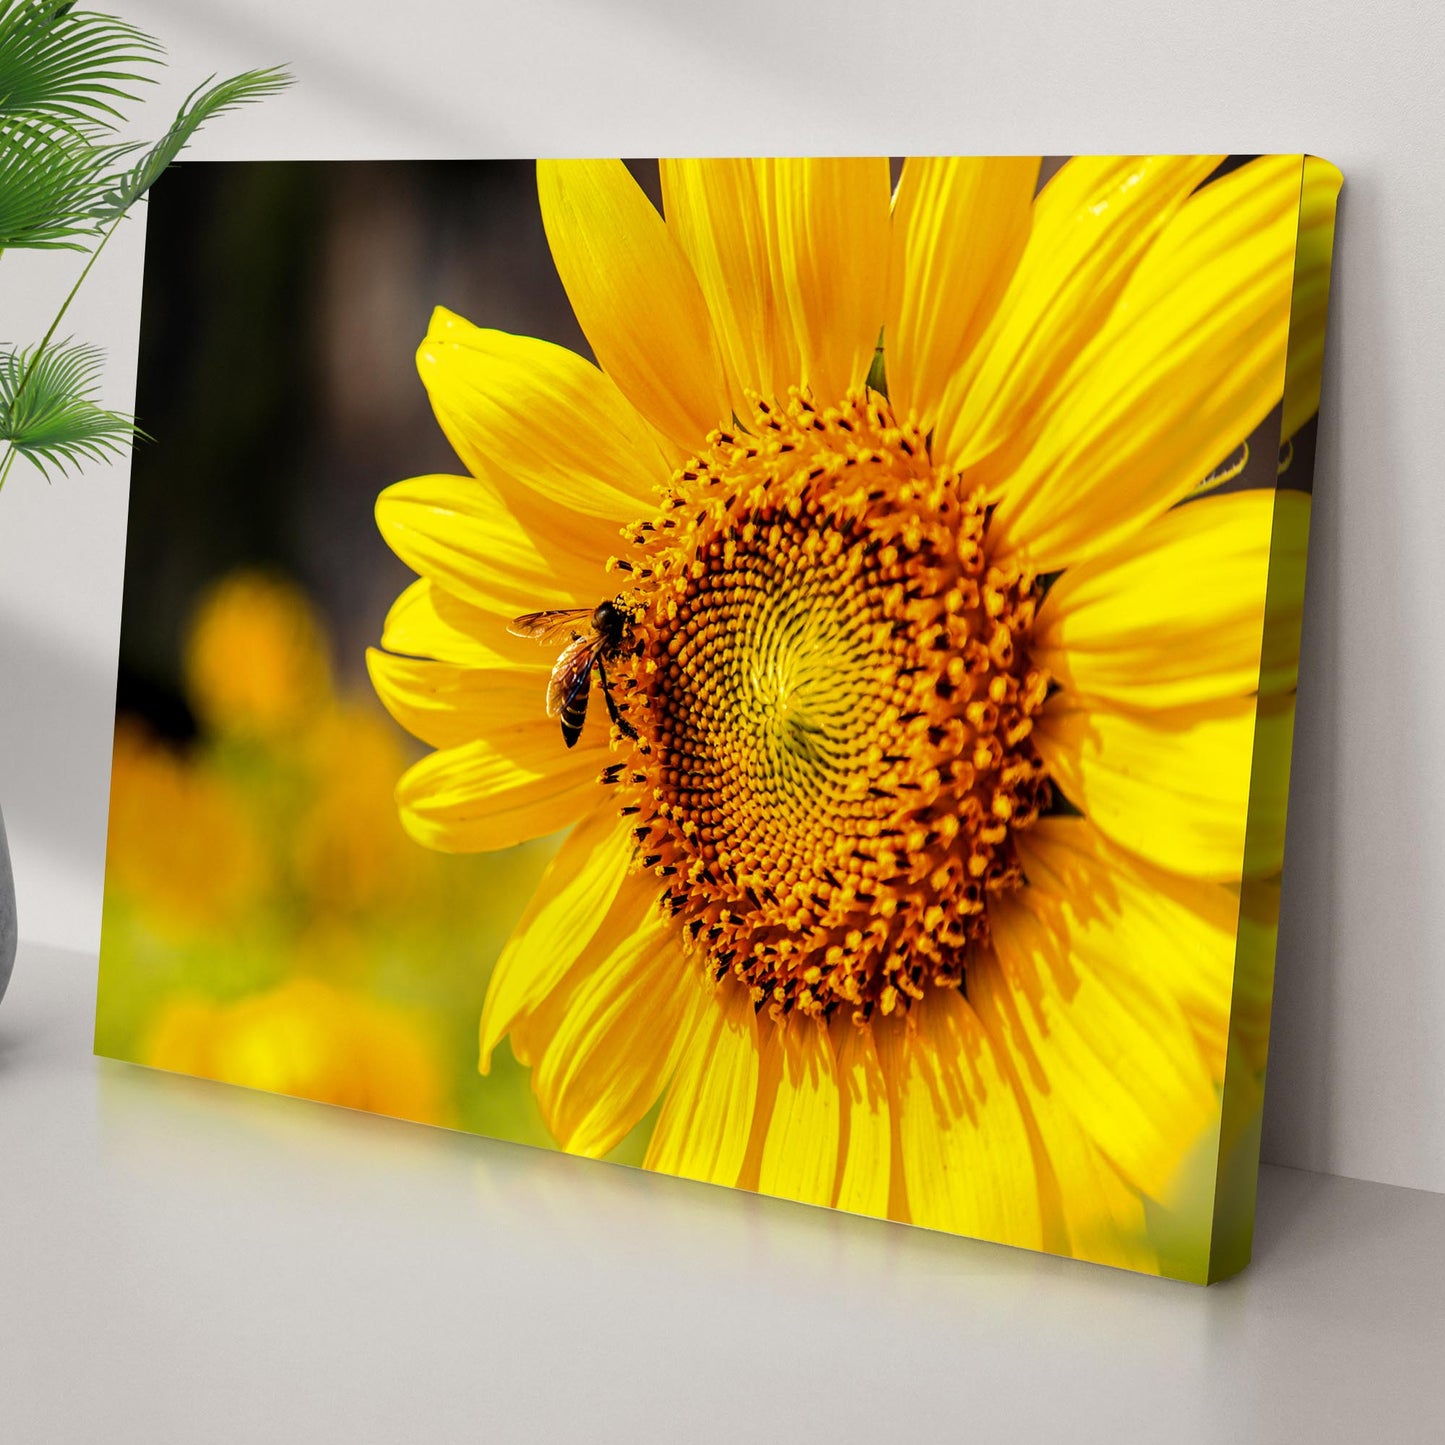 Bee On Sunflower Canvas Wall Art Style 1 - Image by Tailored Canvases